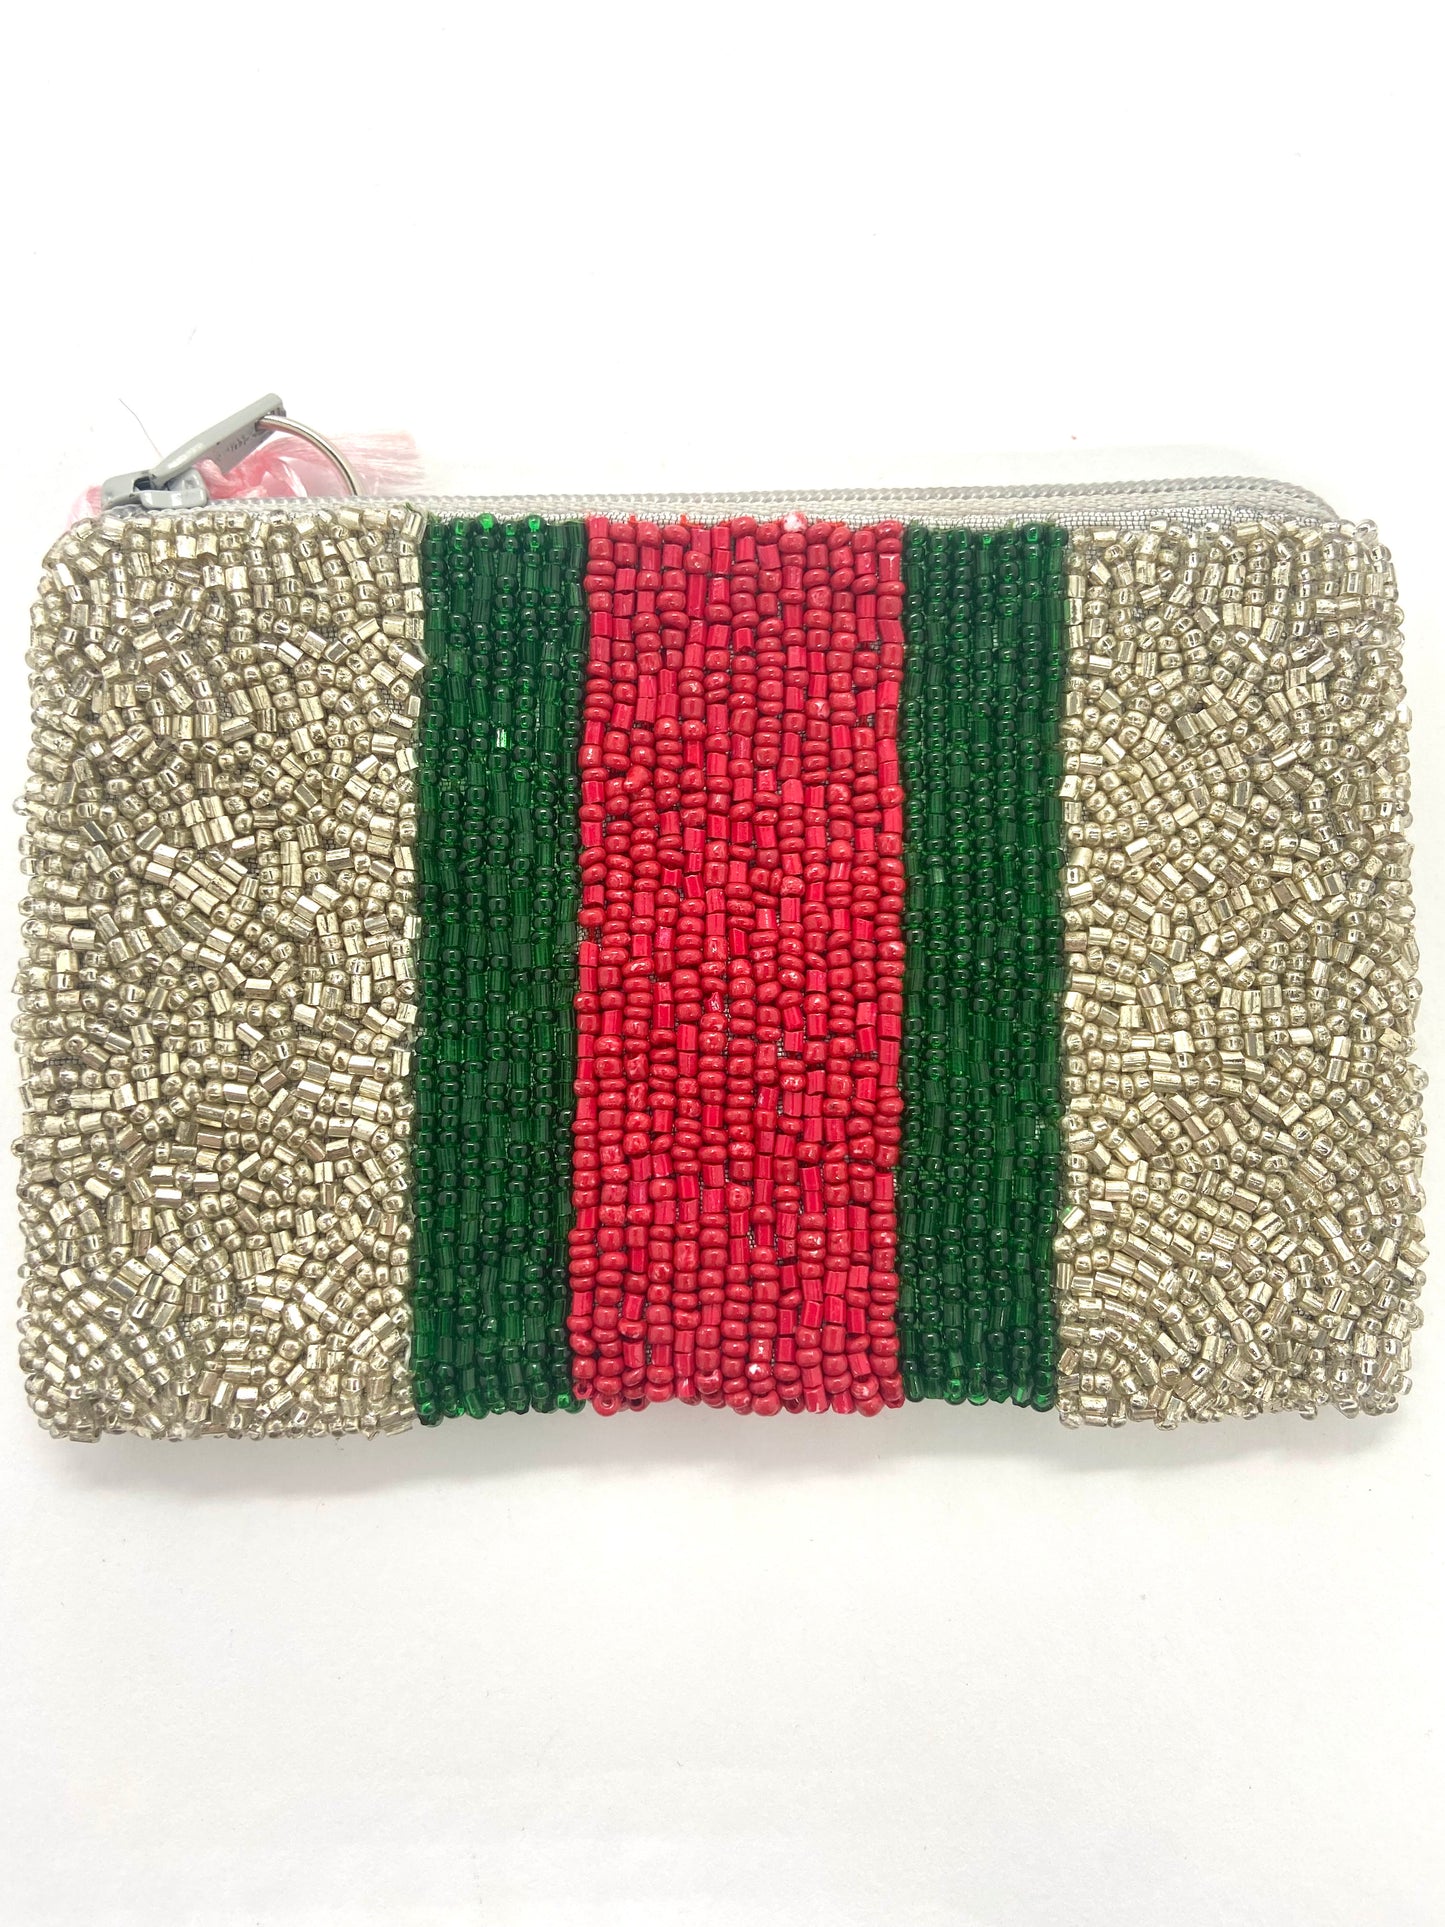 Green and Red Striped Coin Purse